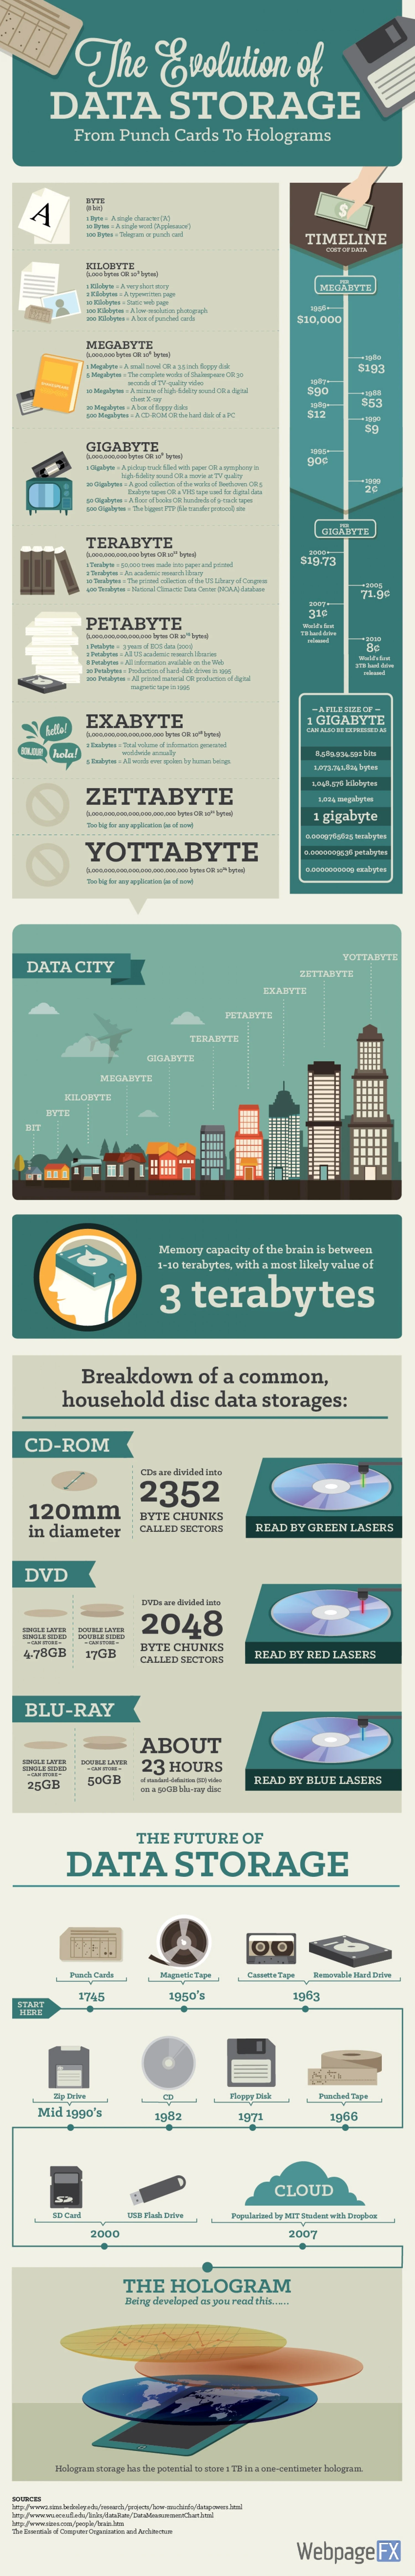 From Punch Cards To Holograms: The Evolution of Data Storage [infographic]